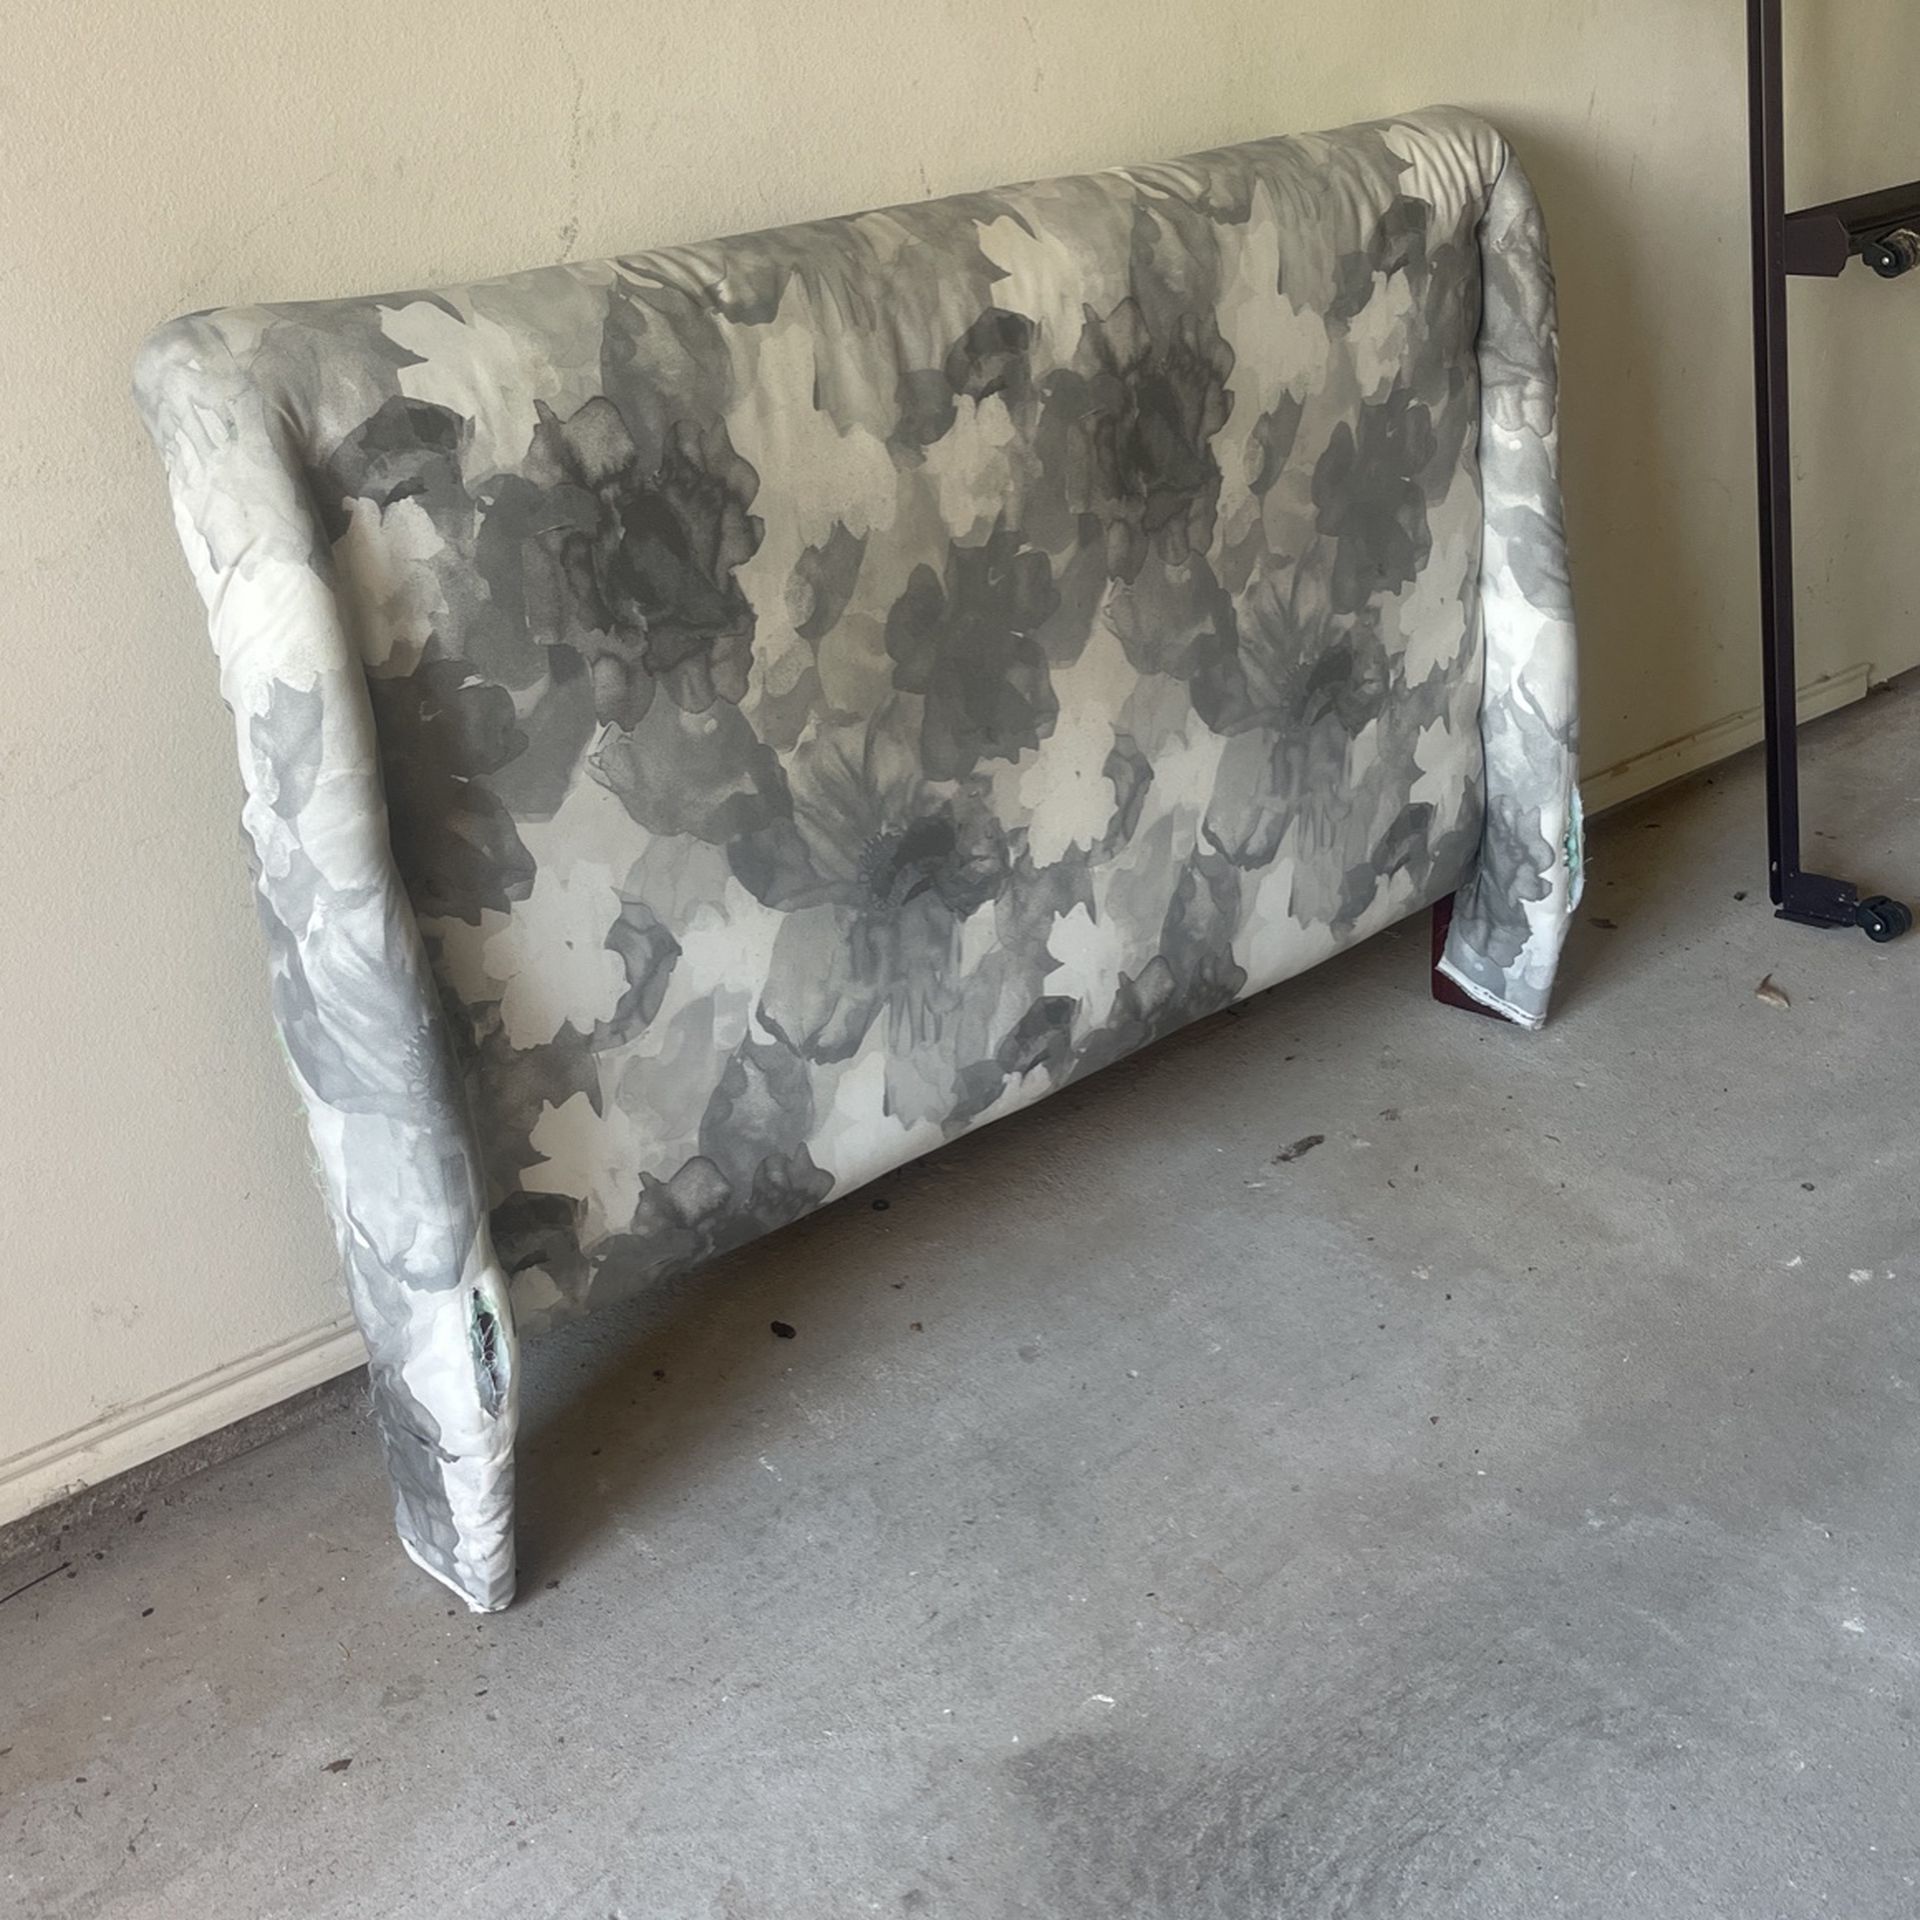 $$SALE$$ Couch, Mattress, Reupholstered Queen Sized Sled Frame